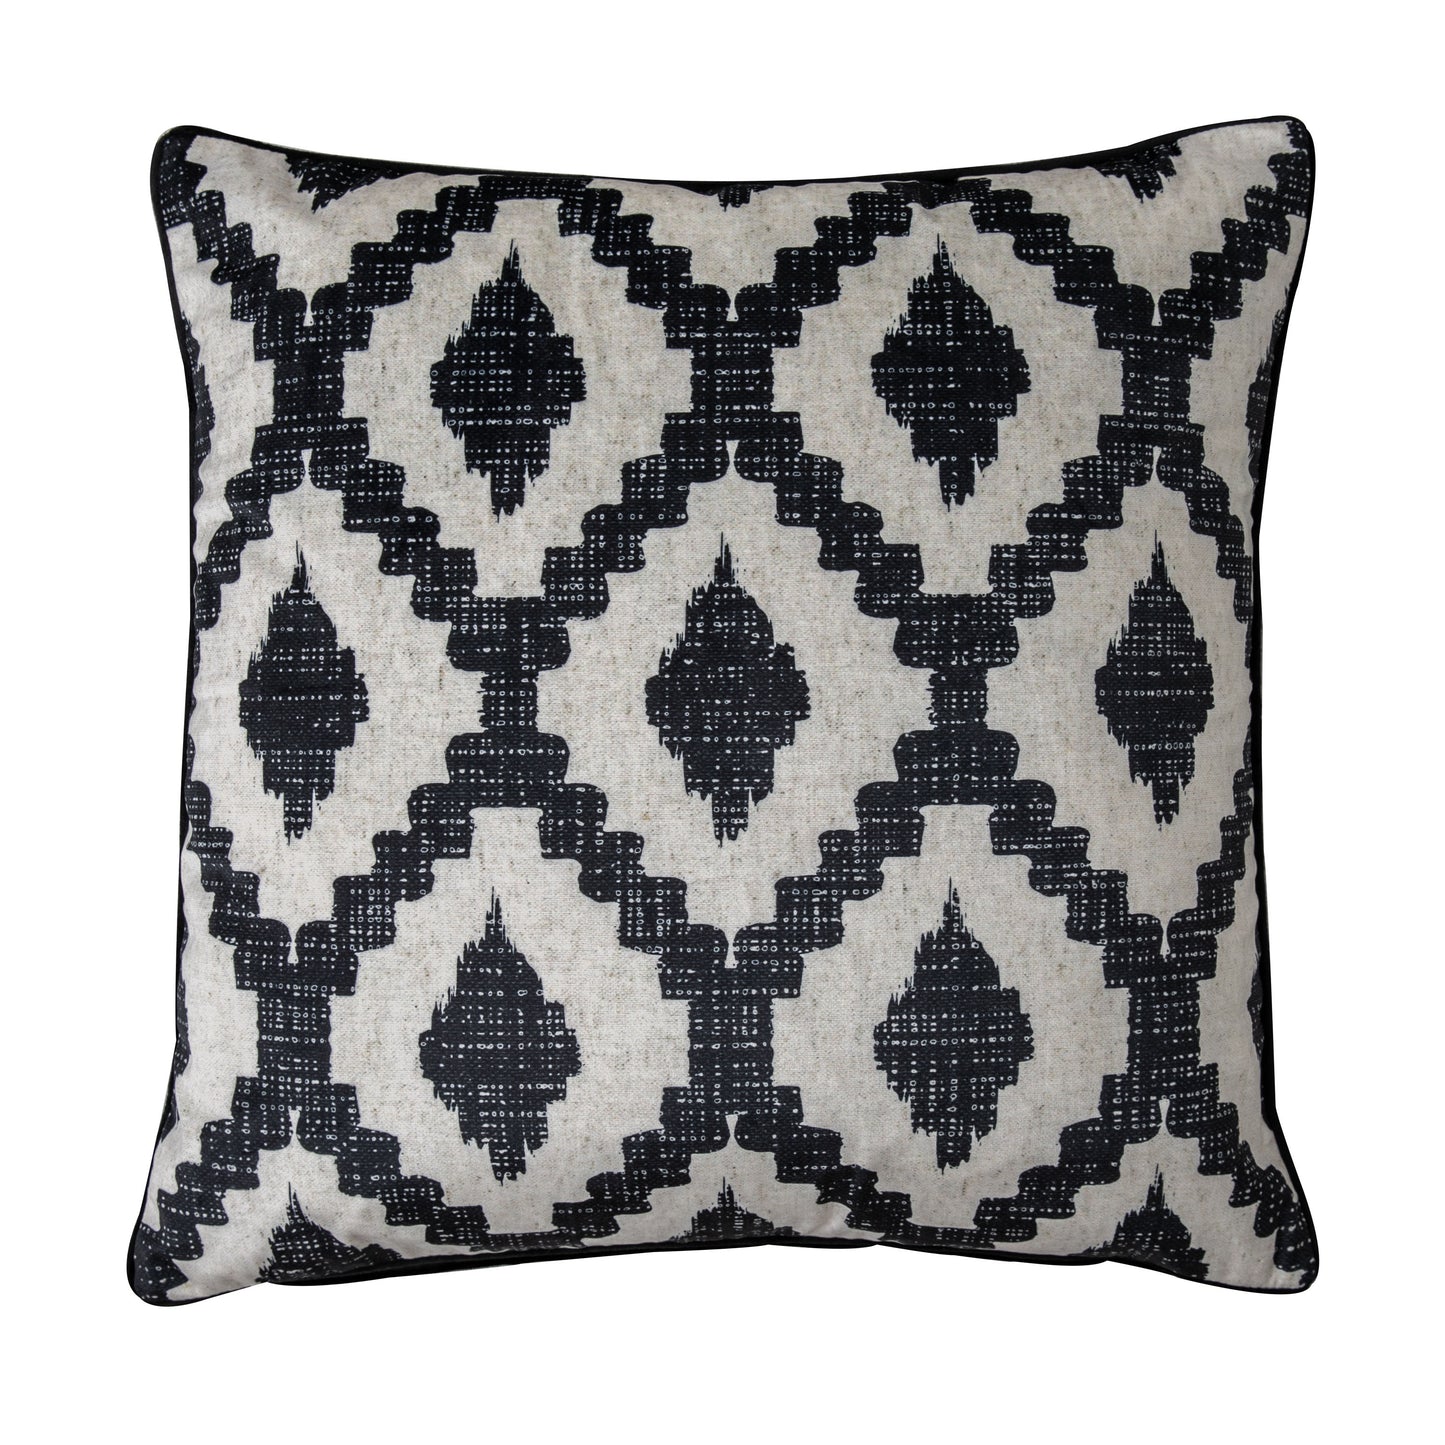 Assington Cushion Black / White 550x550mm with a black and white geometric pattern for home interior decor from Kikiathome.co.uk.